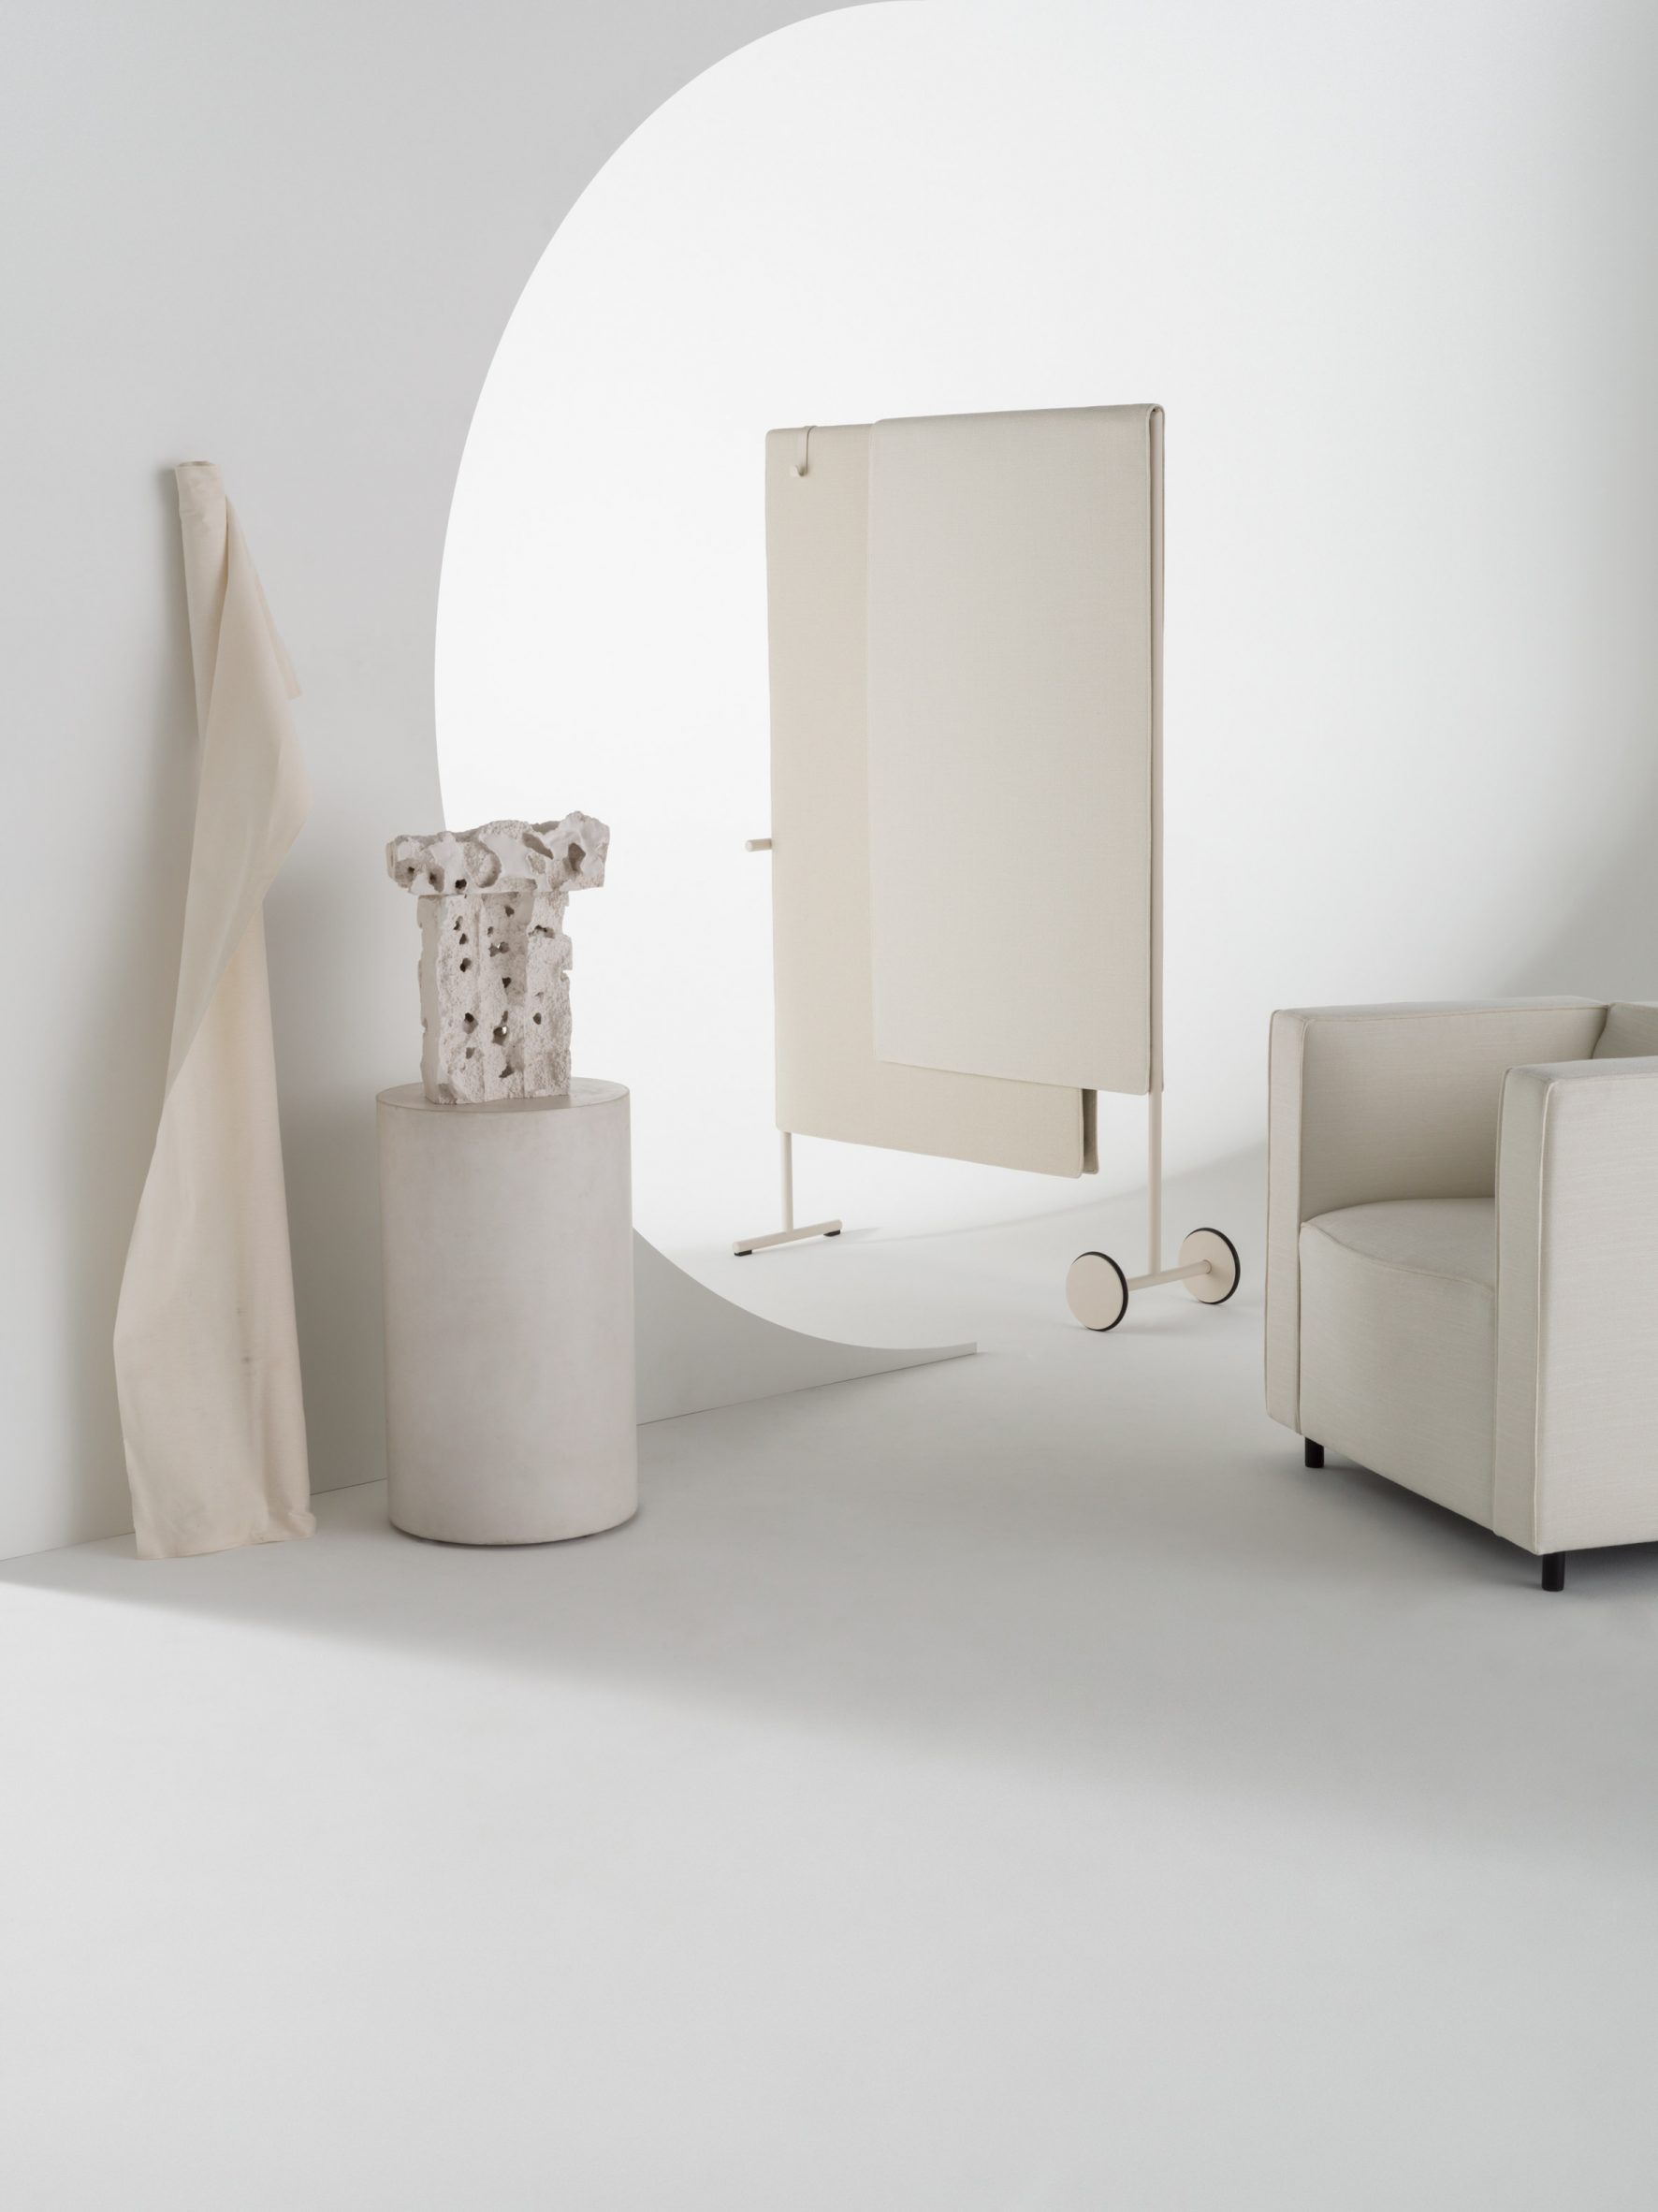 Offecct launches Pauline Deltour furniture as first post